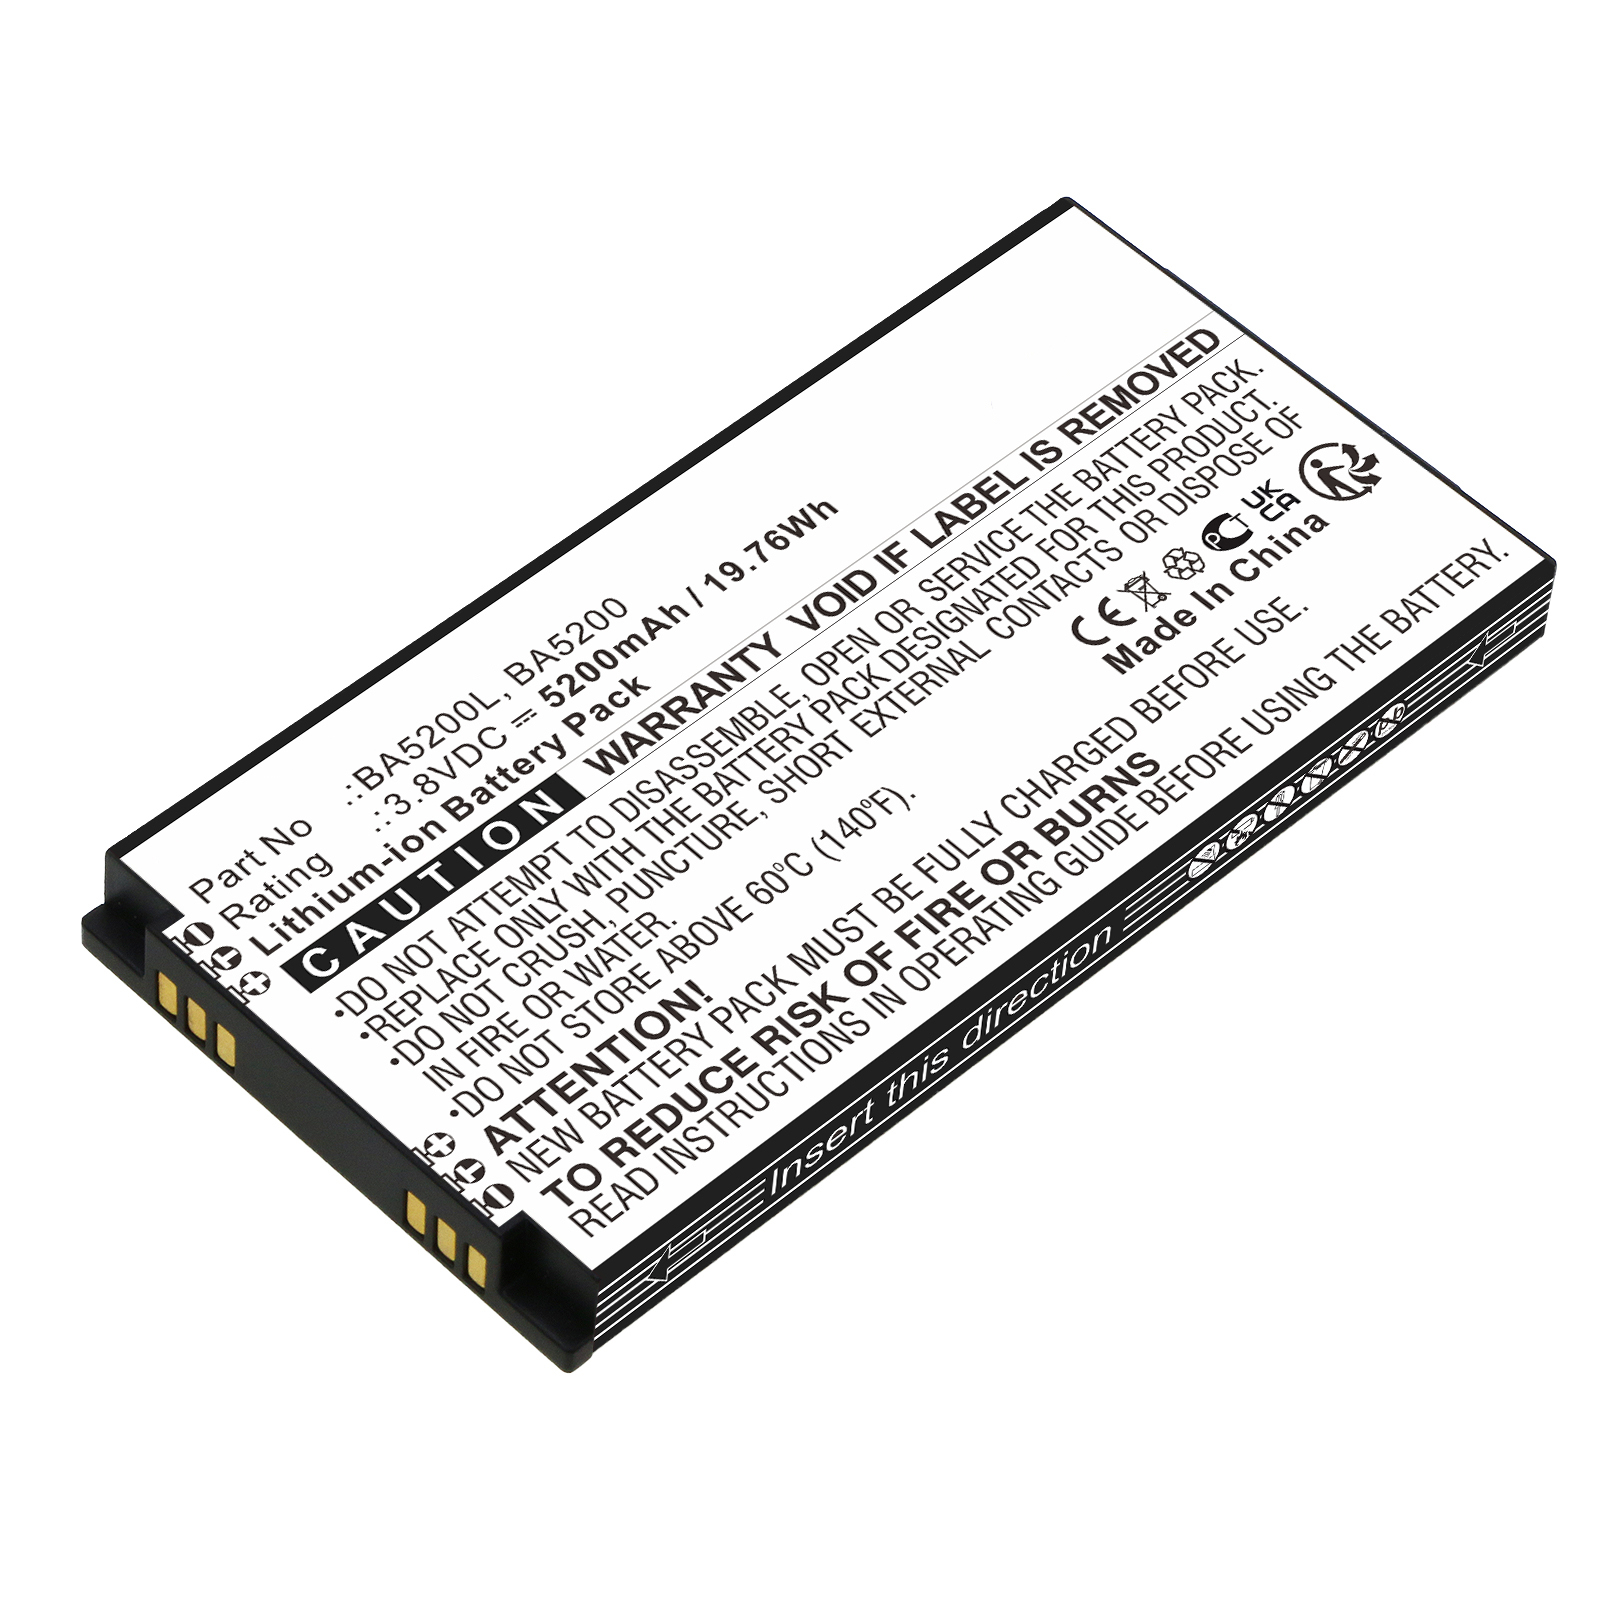 Synergy Digital Equipment Battery, Compatible with UniStrong BA5200 Equipment Battery (Li-ion, 3.8V, 5200mAh)